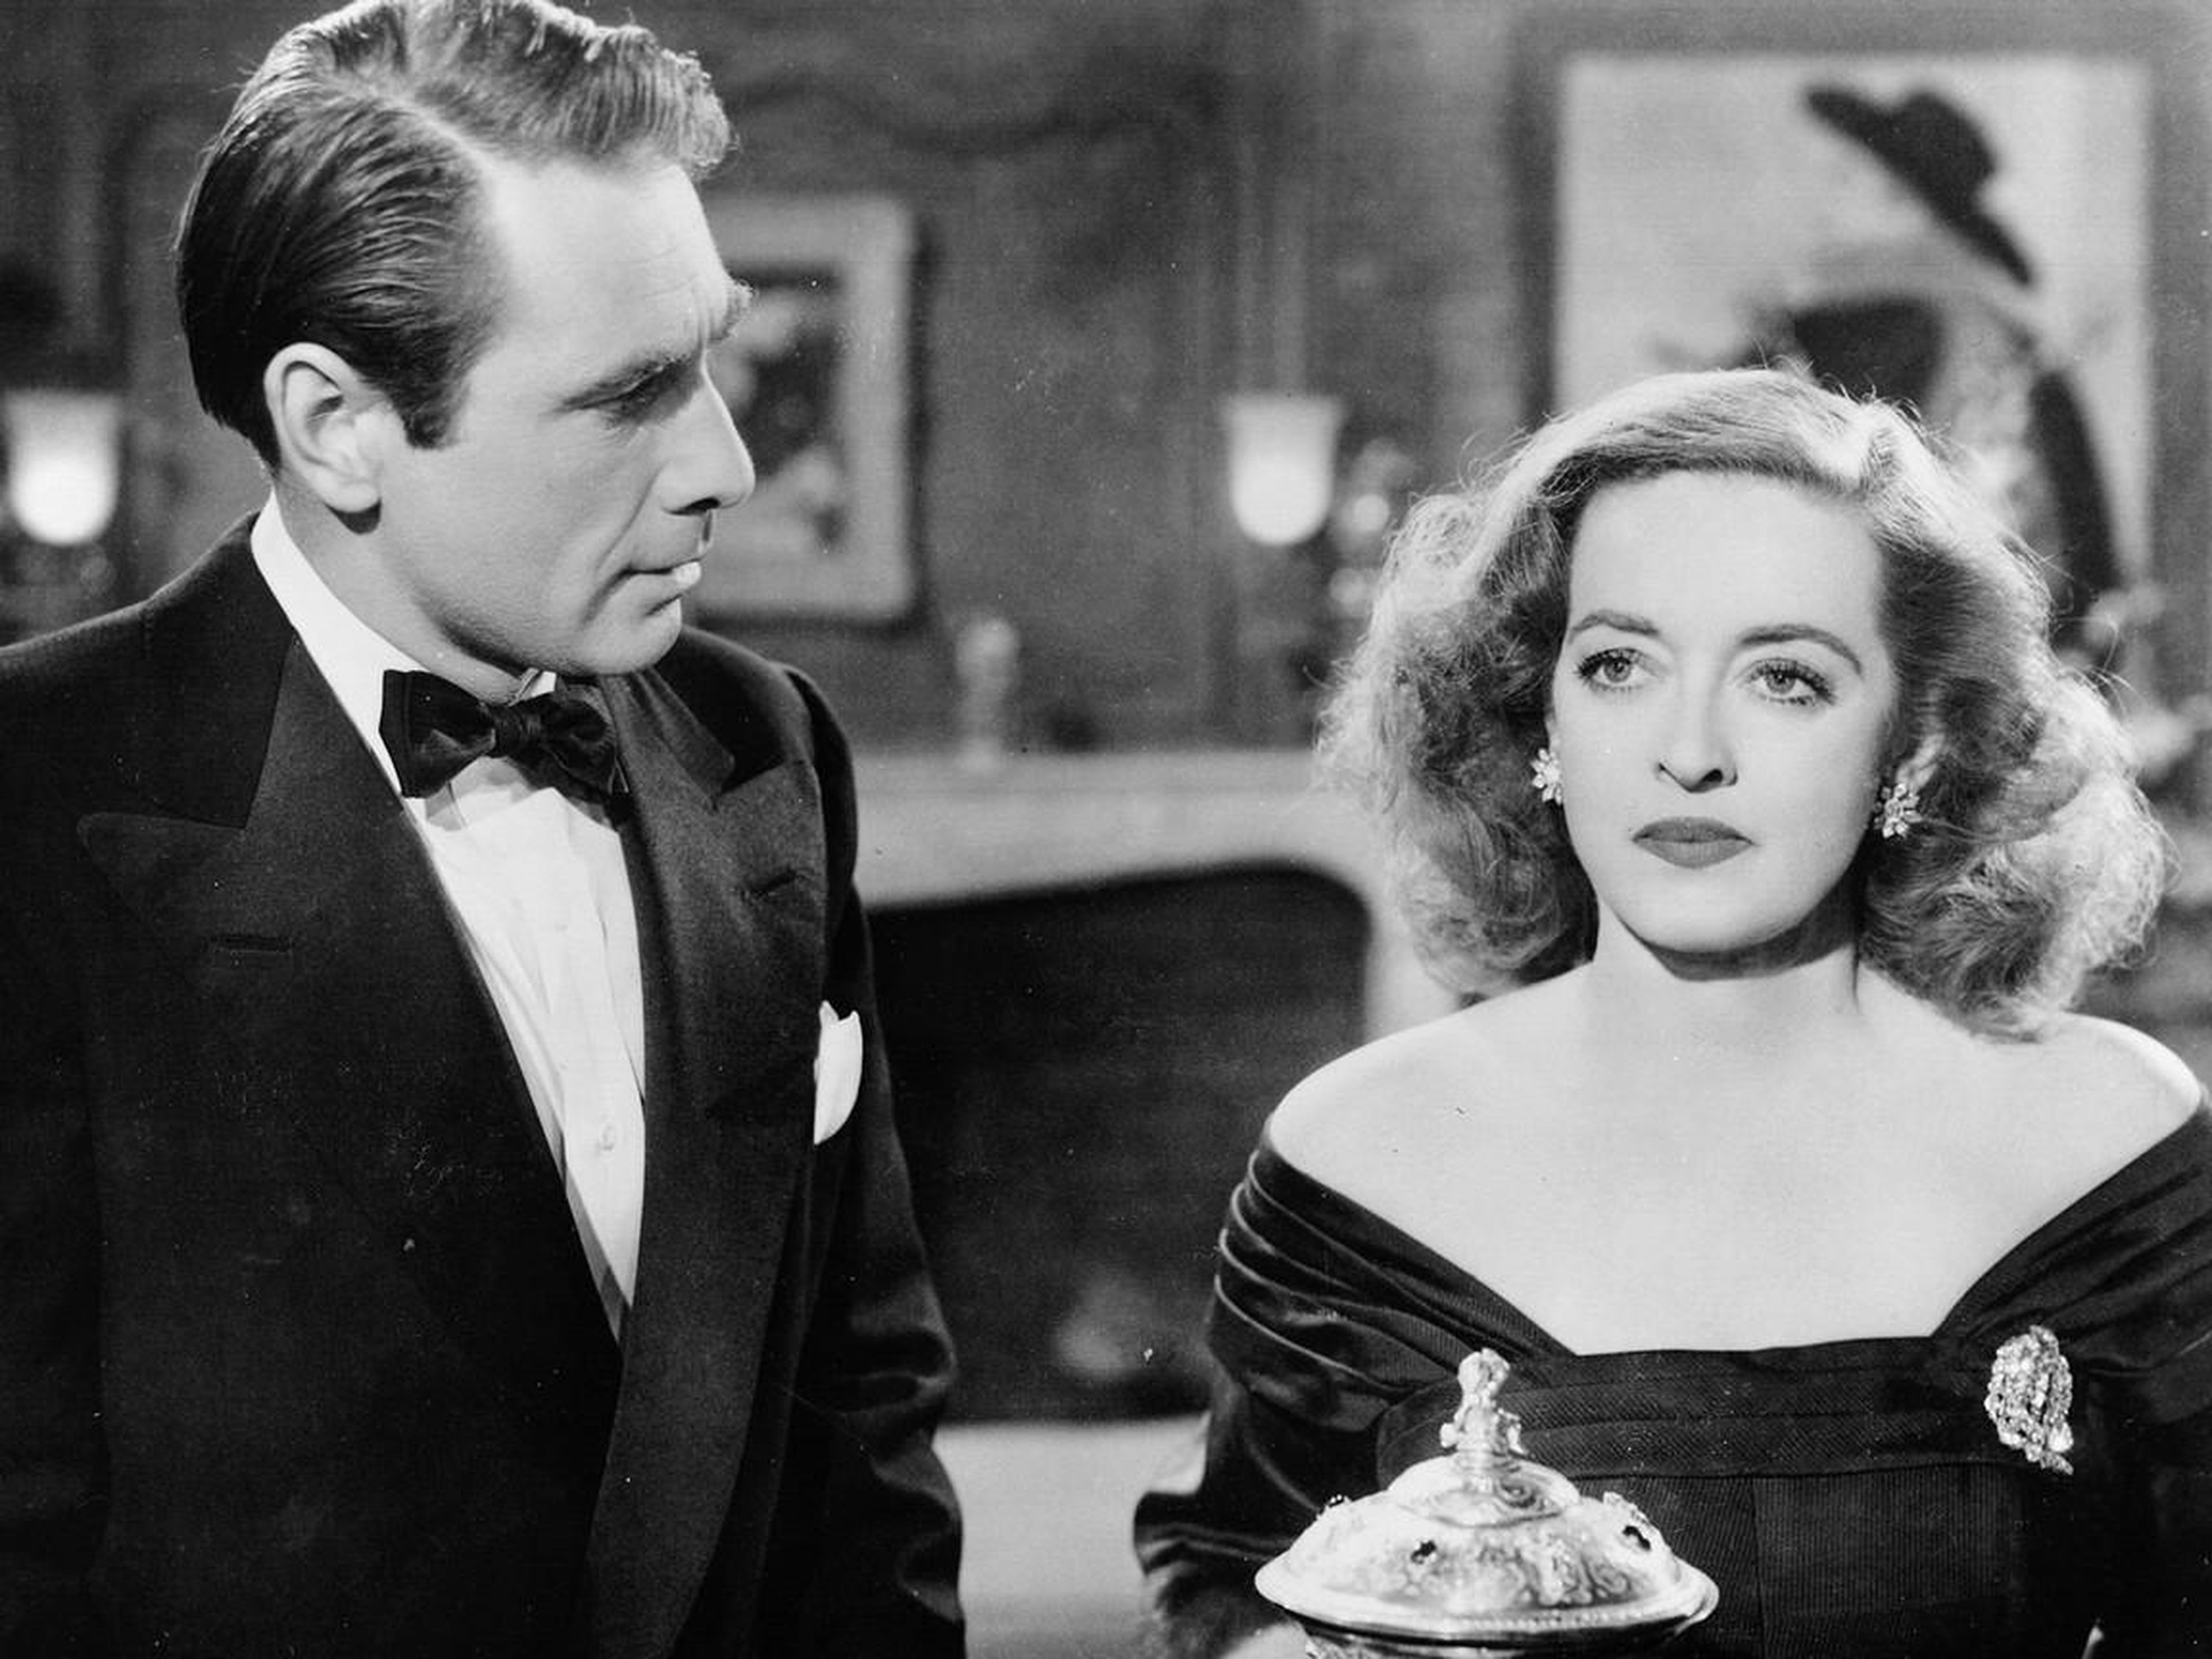 12. "All About Eve" (1950)